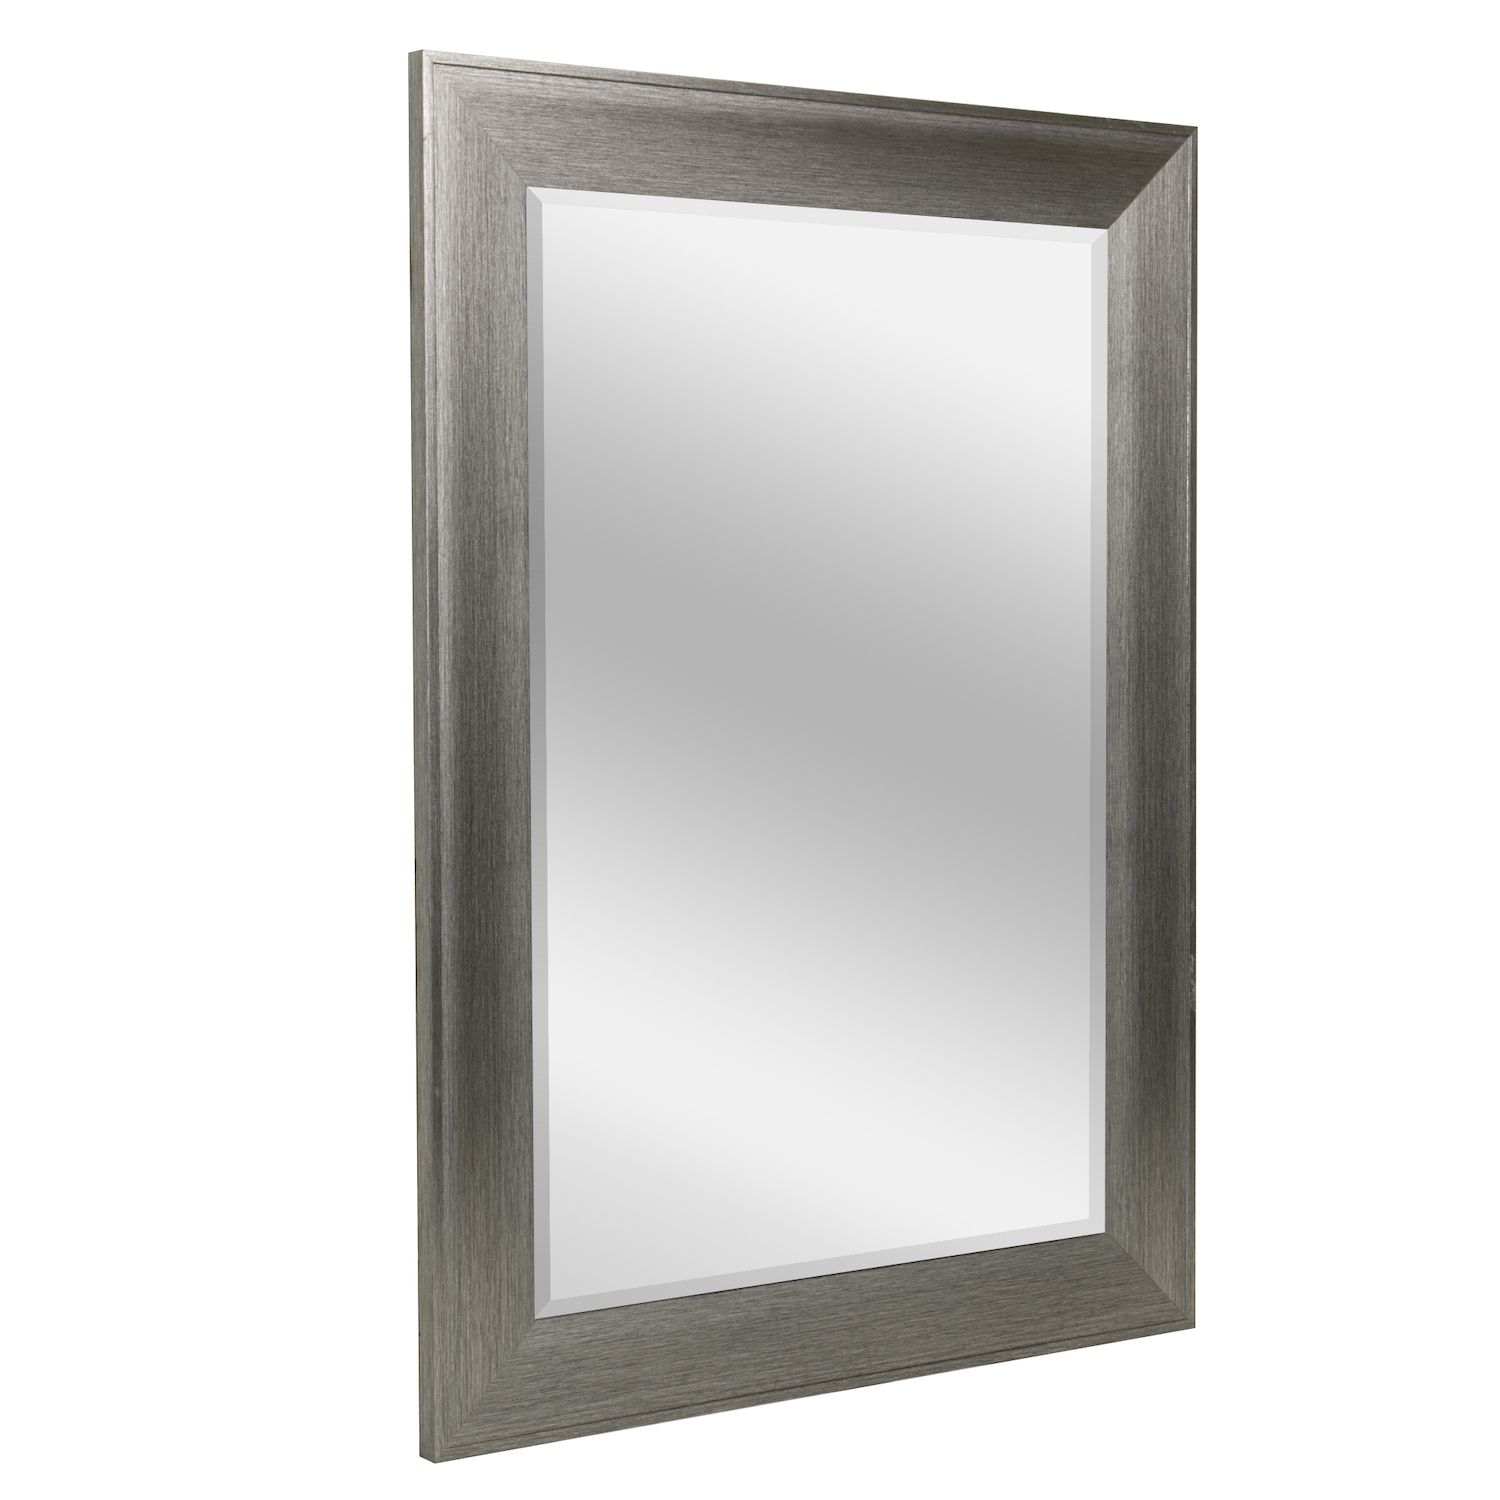 Image for Head West Metallic Gray Framed Wall Mirror 29" x 35" at Kohl's.